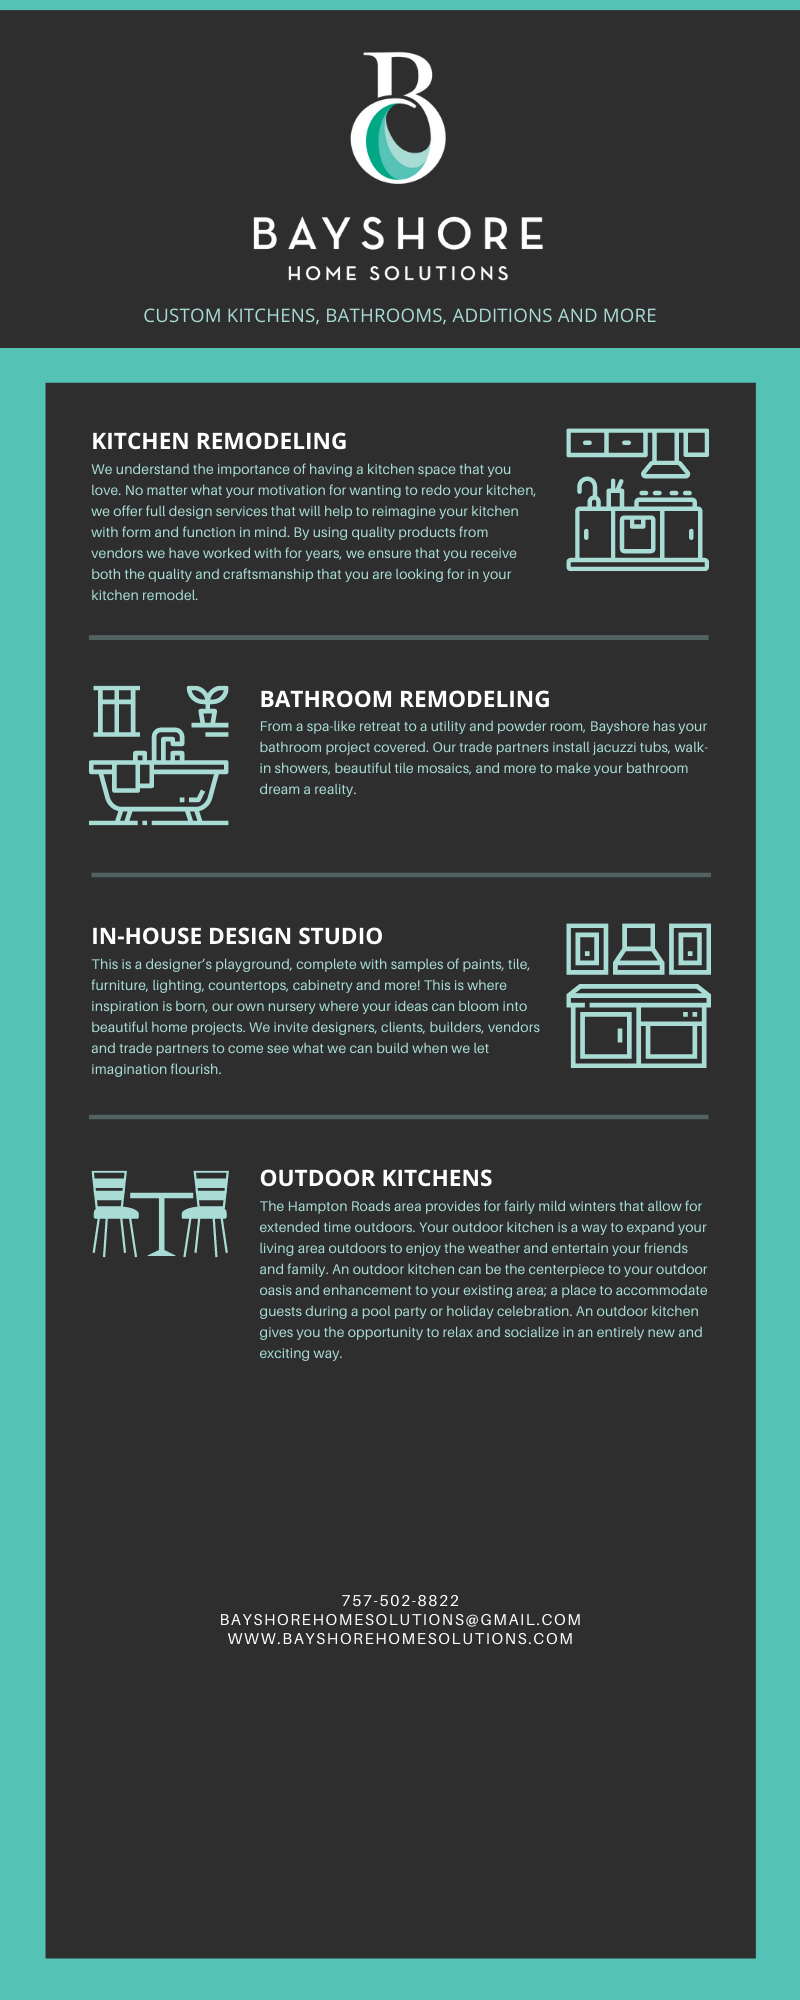 Bayshore Home Solutions Infographic May2021 2